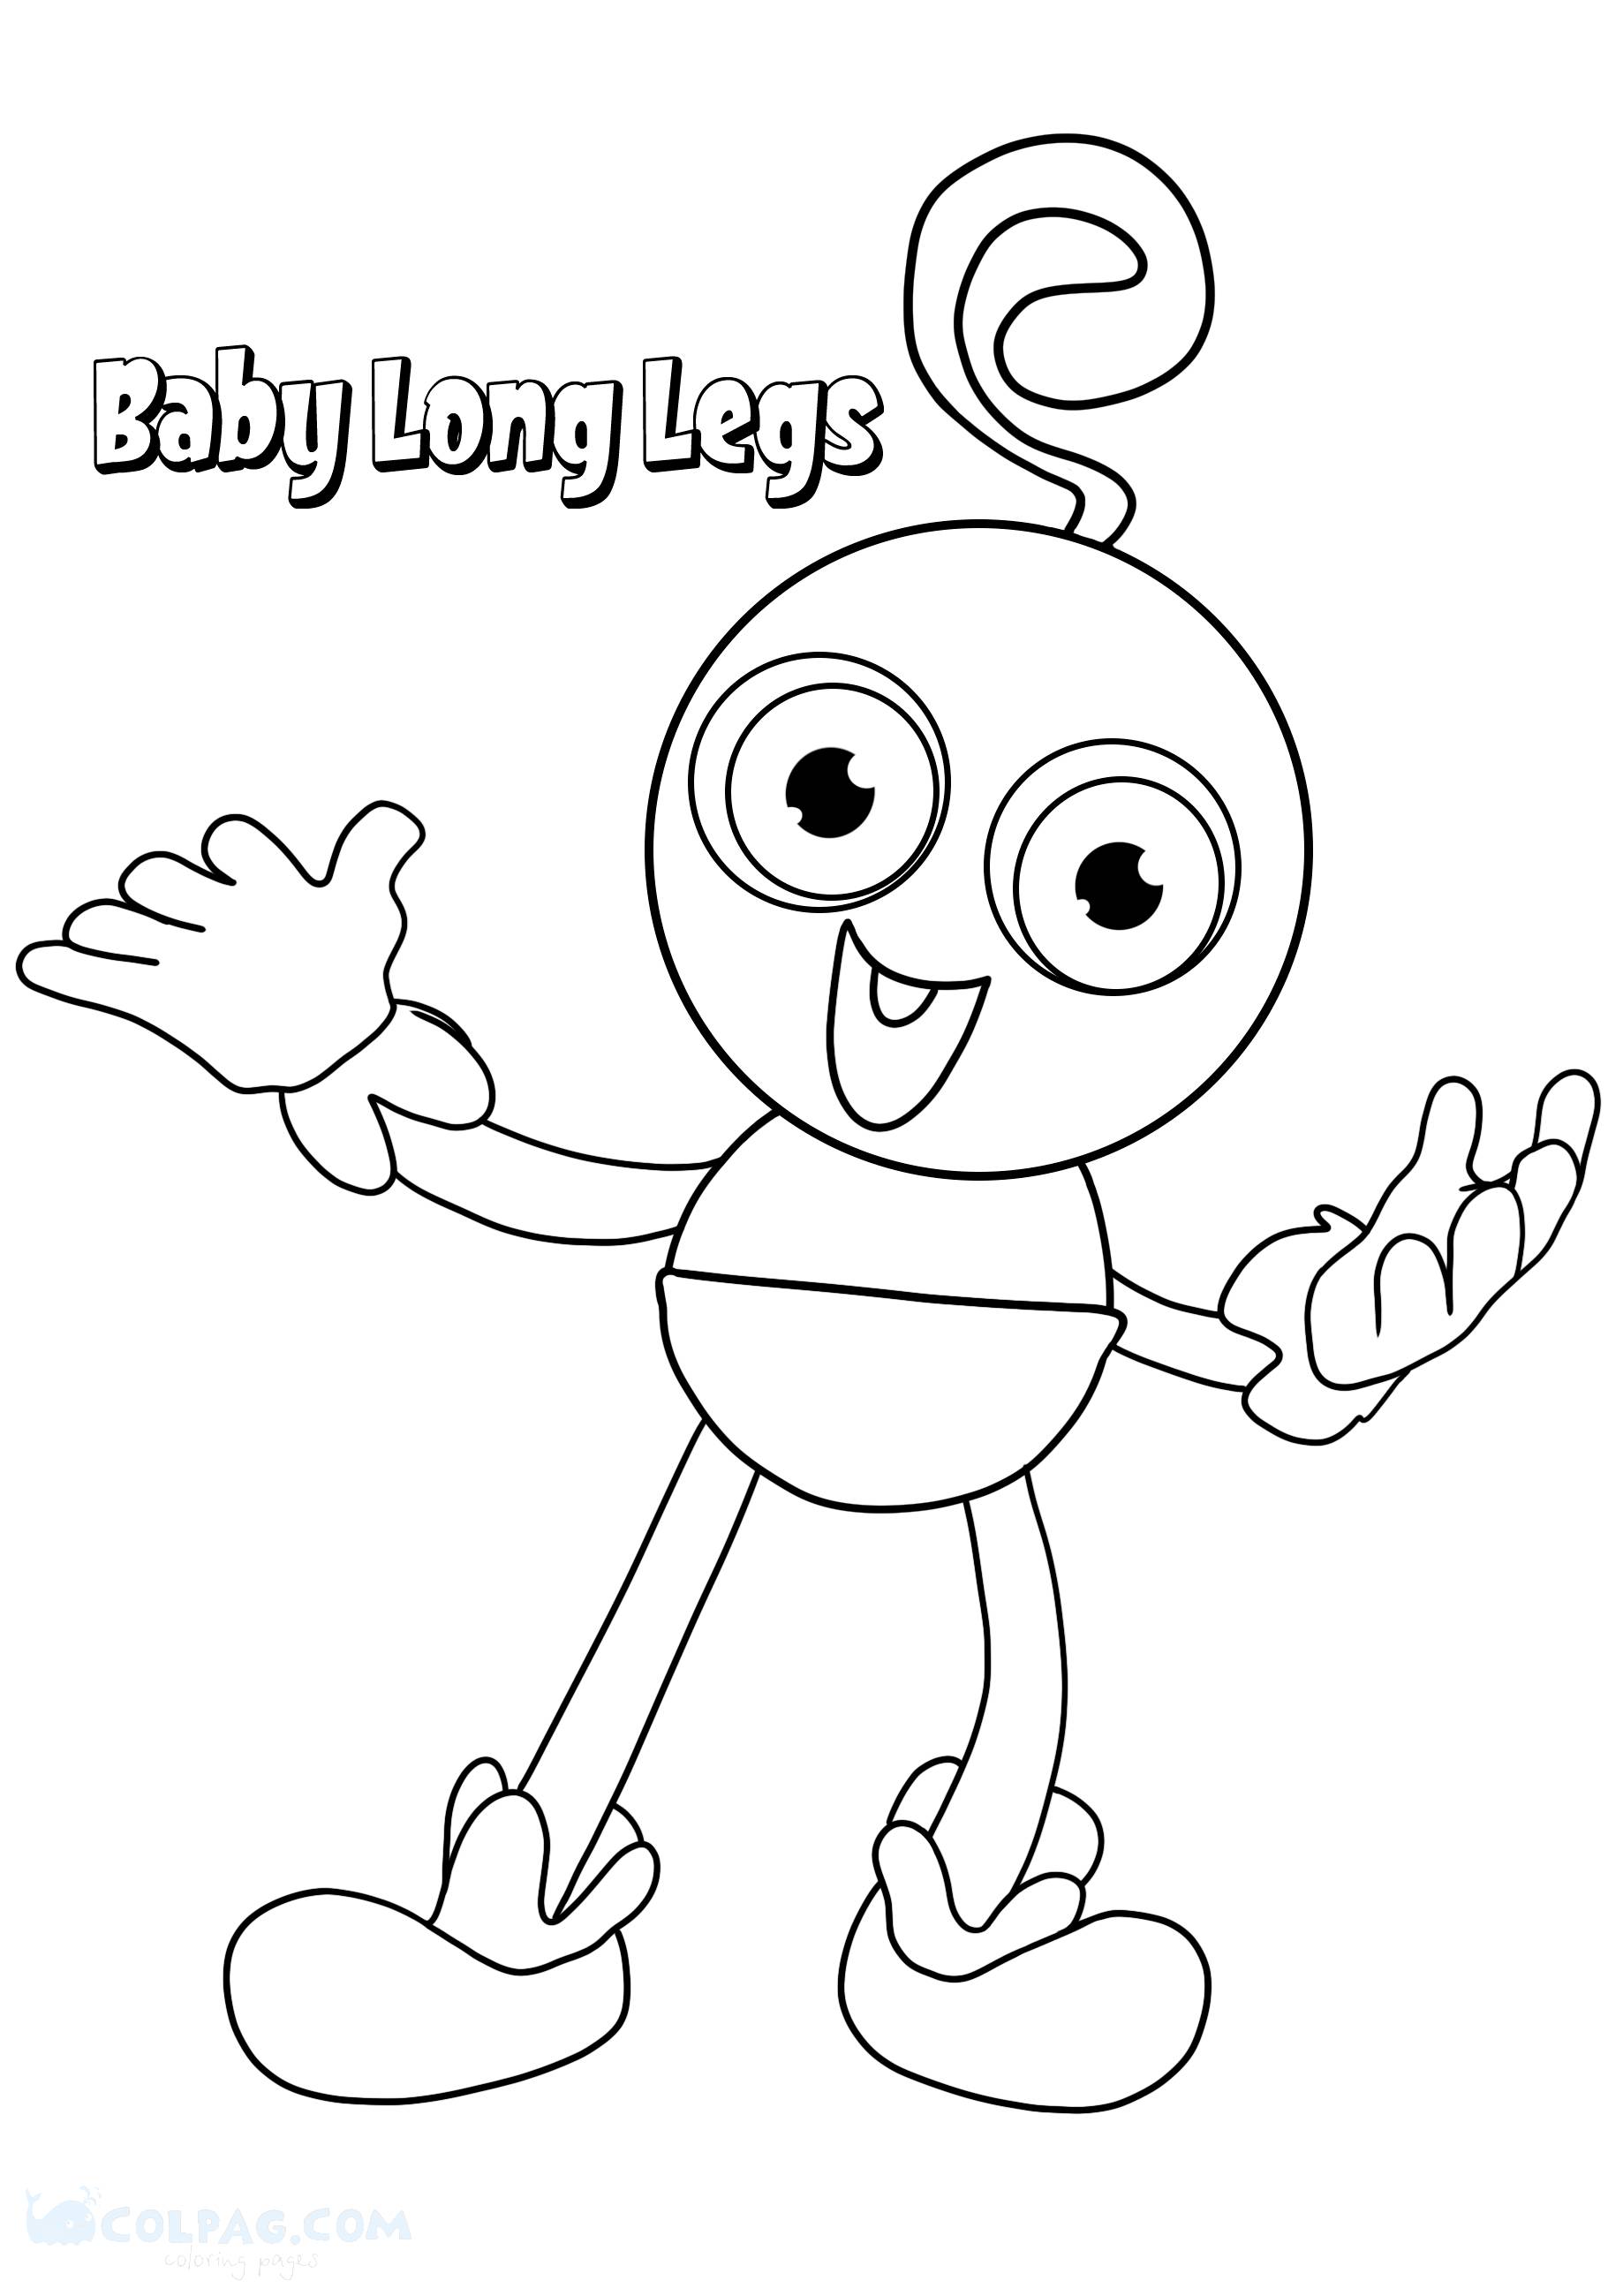 baby-long-legs-coloring-page-colpag-com-1